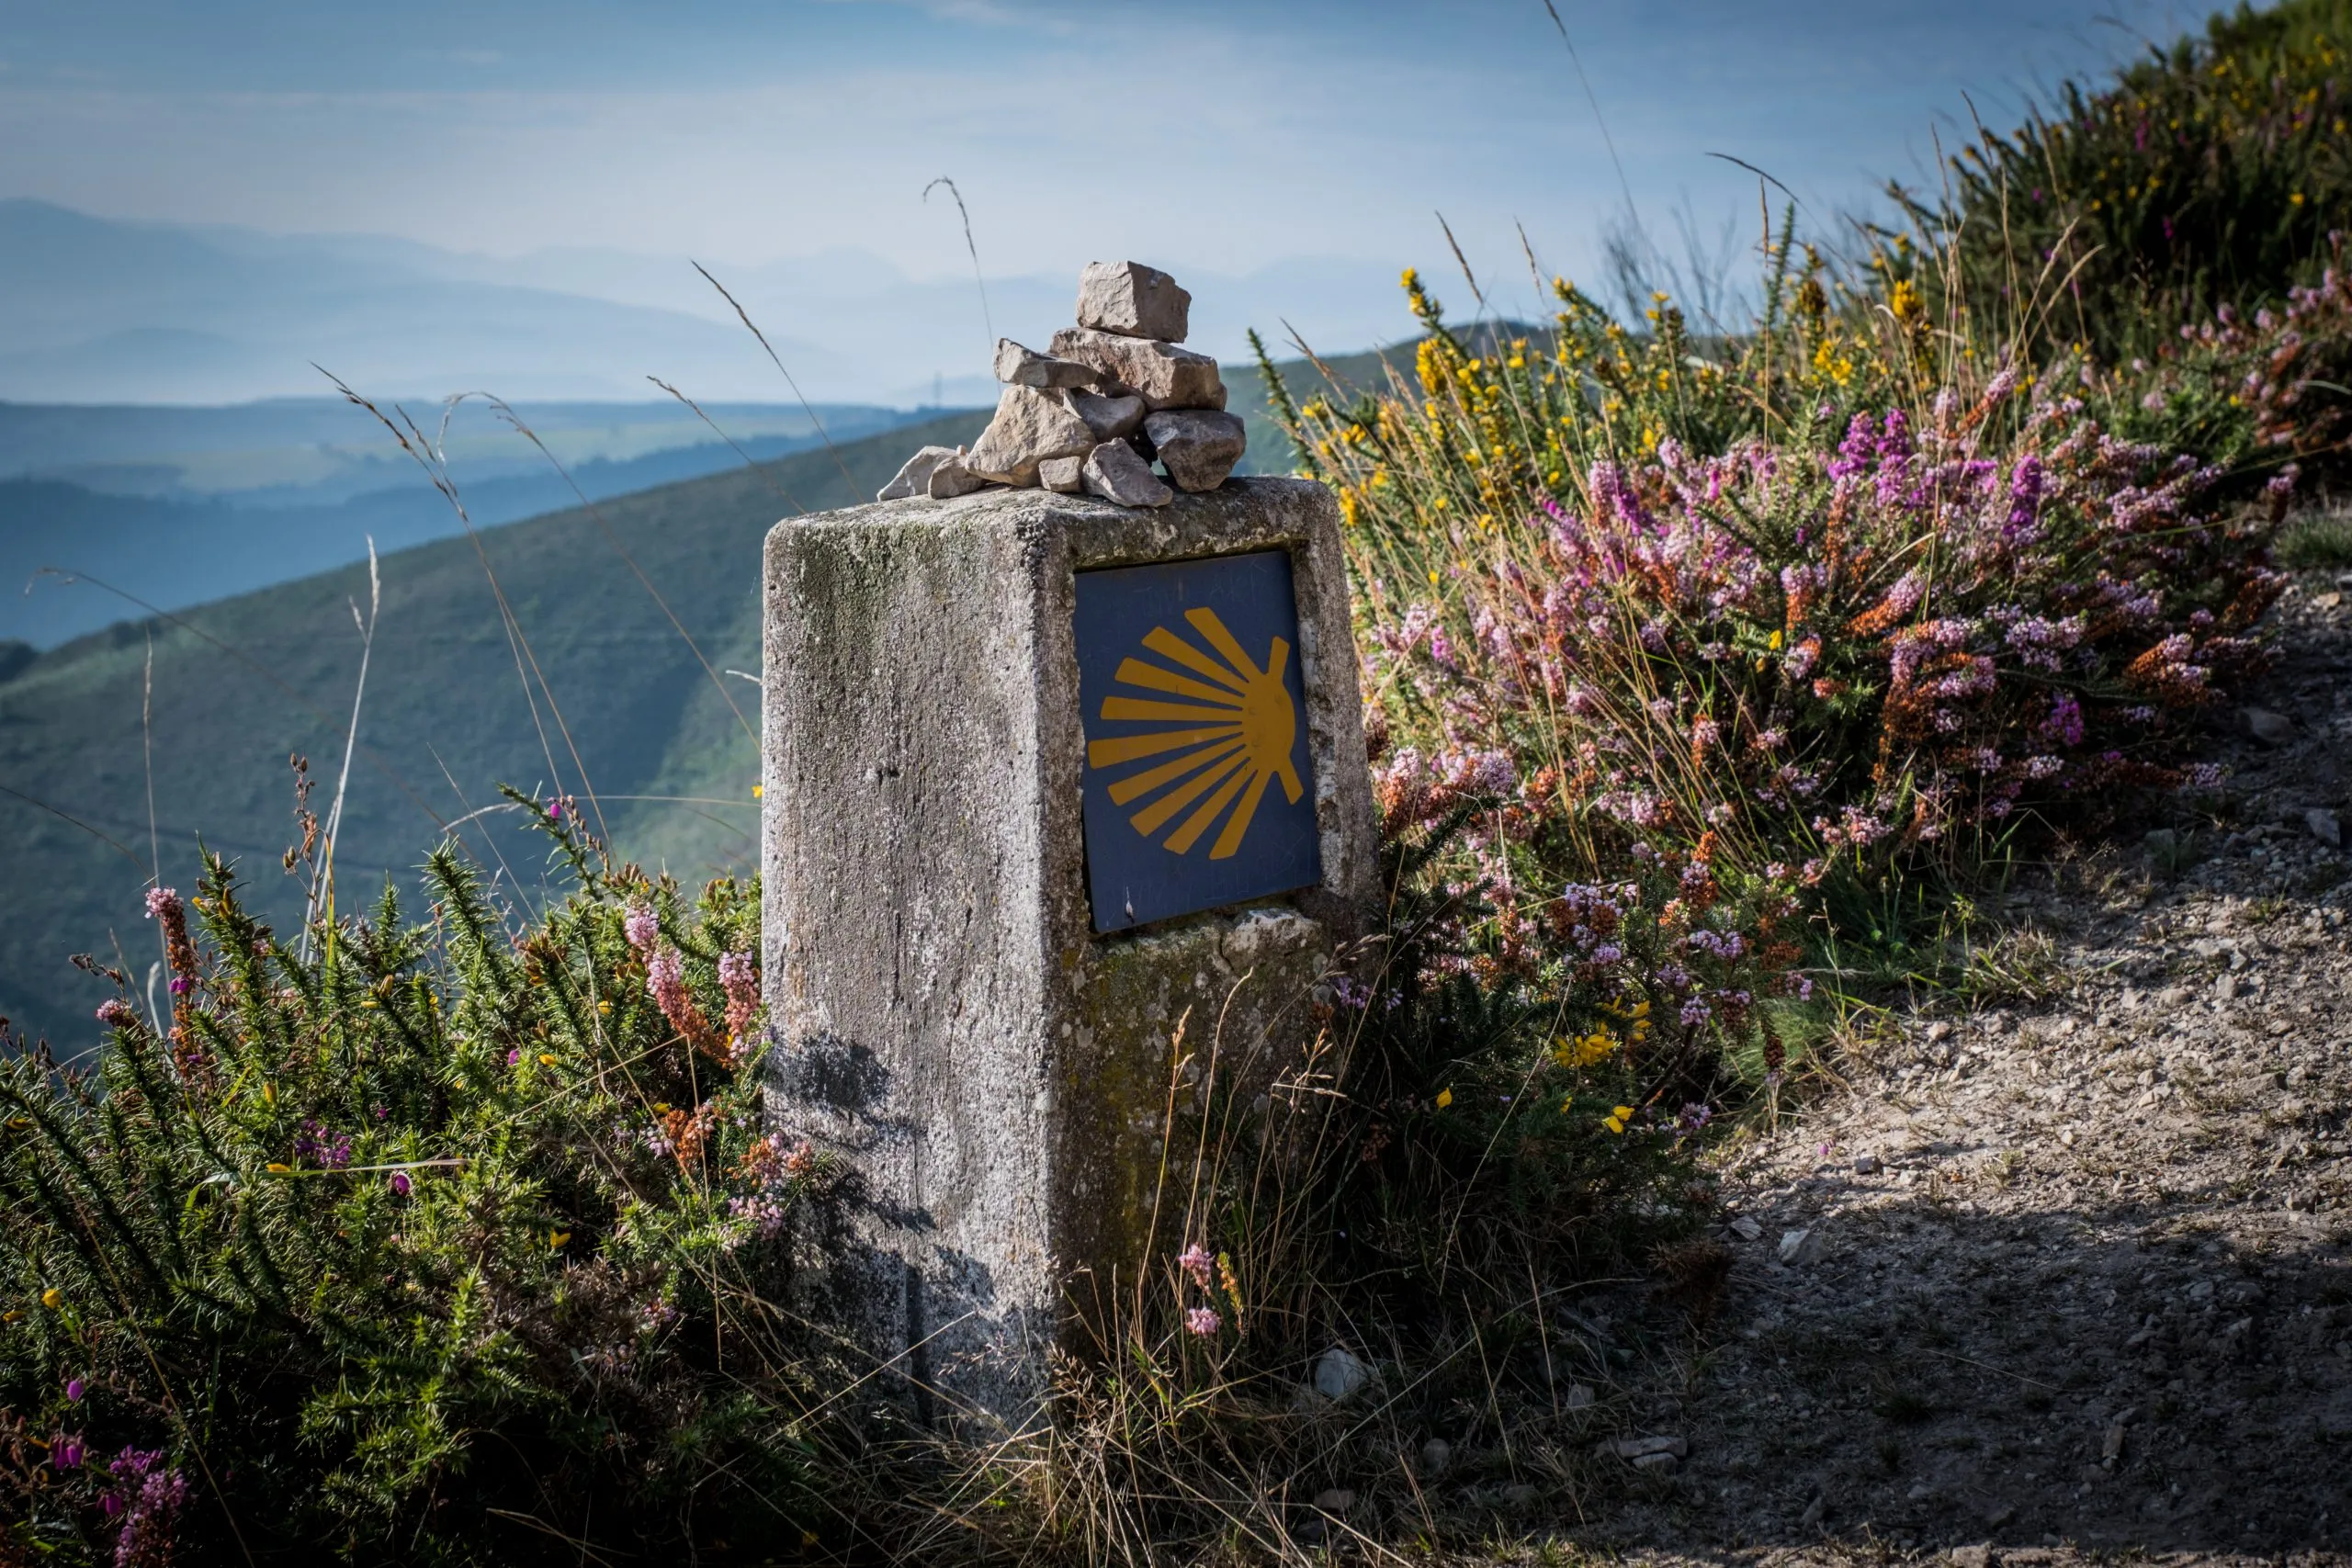 The oldest Camino de Santiago in Spain the "Camino Primitivo" leading from Oviedo to Santiago de Compostela (on the foto the old route via Hospitales)